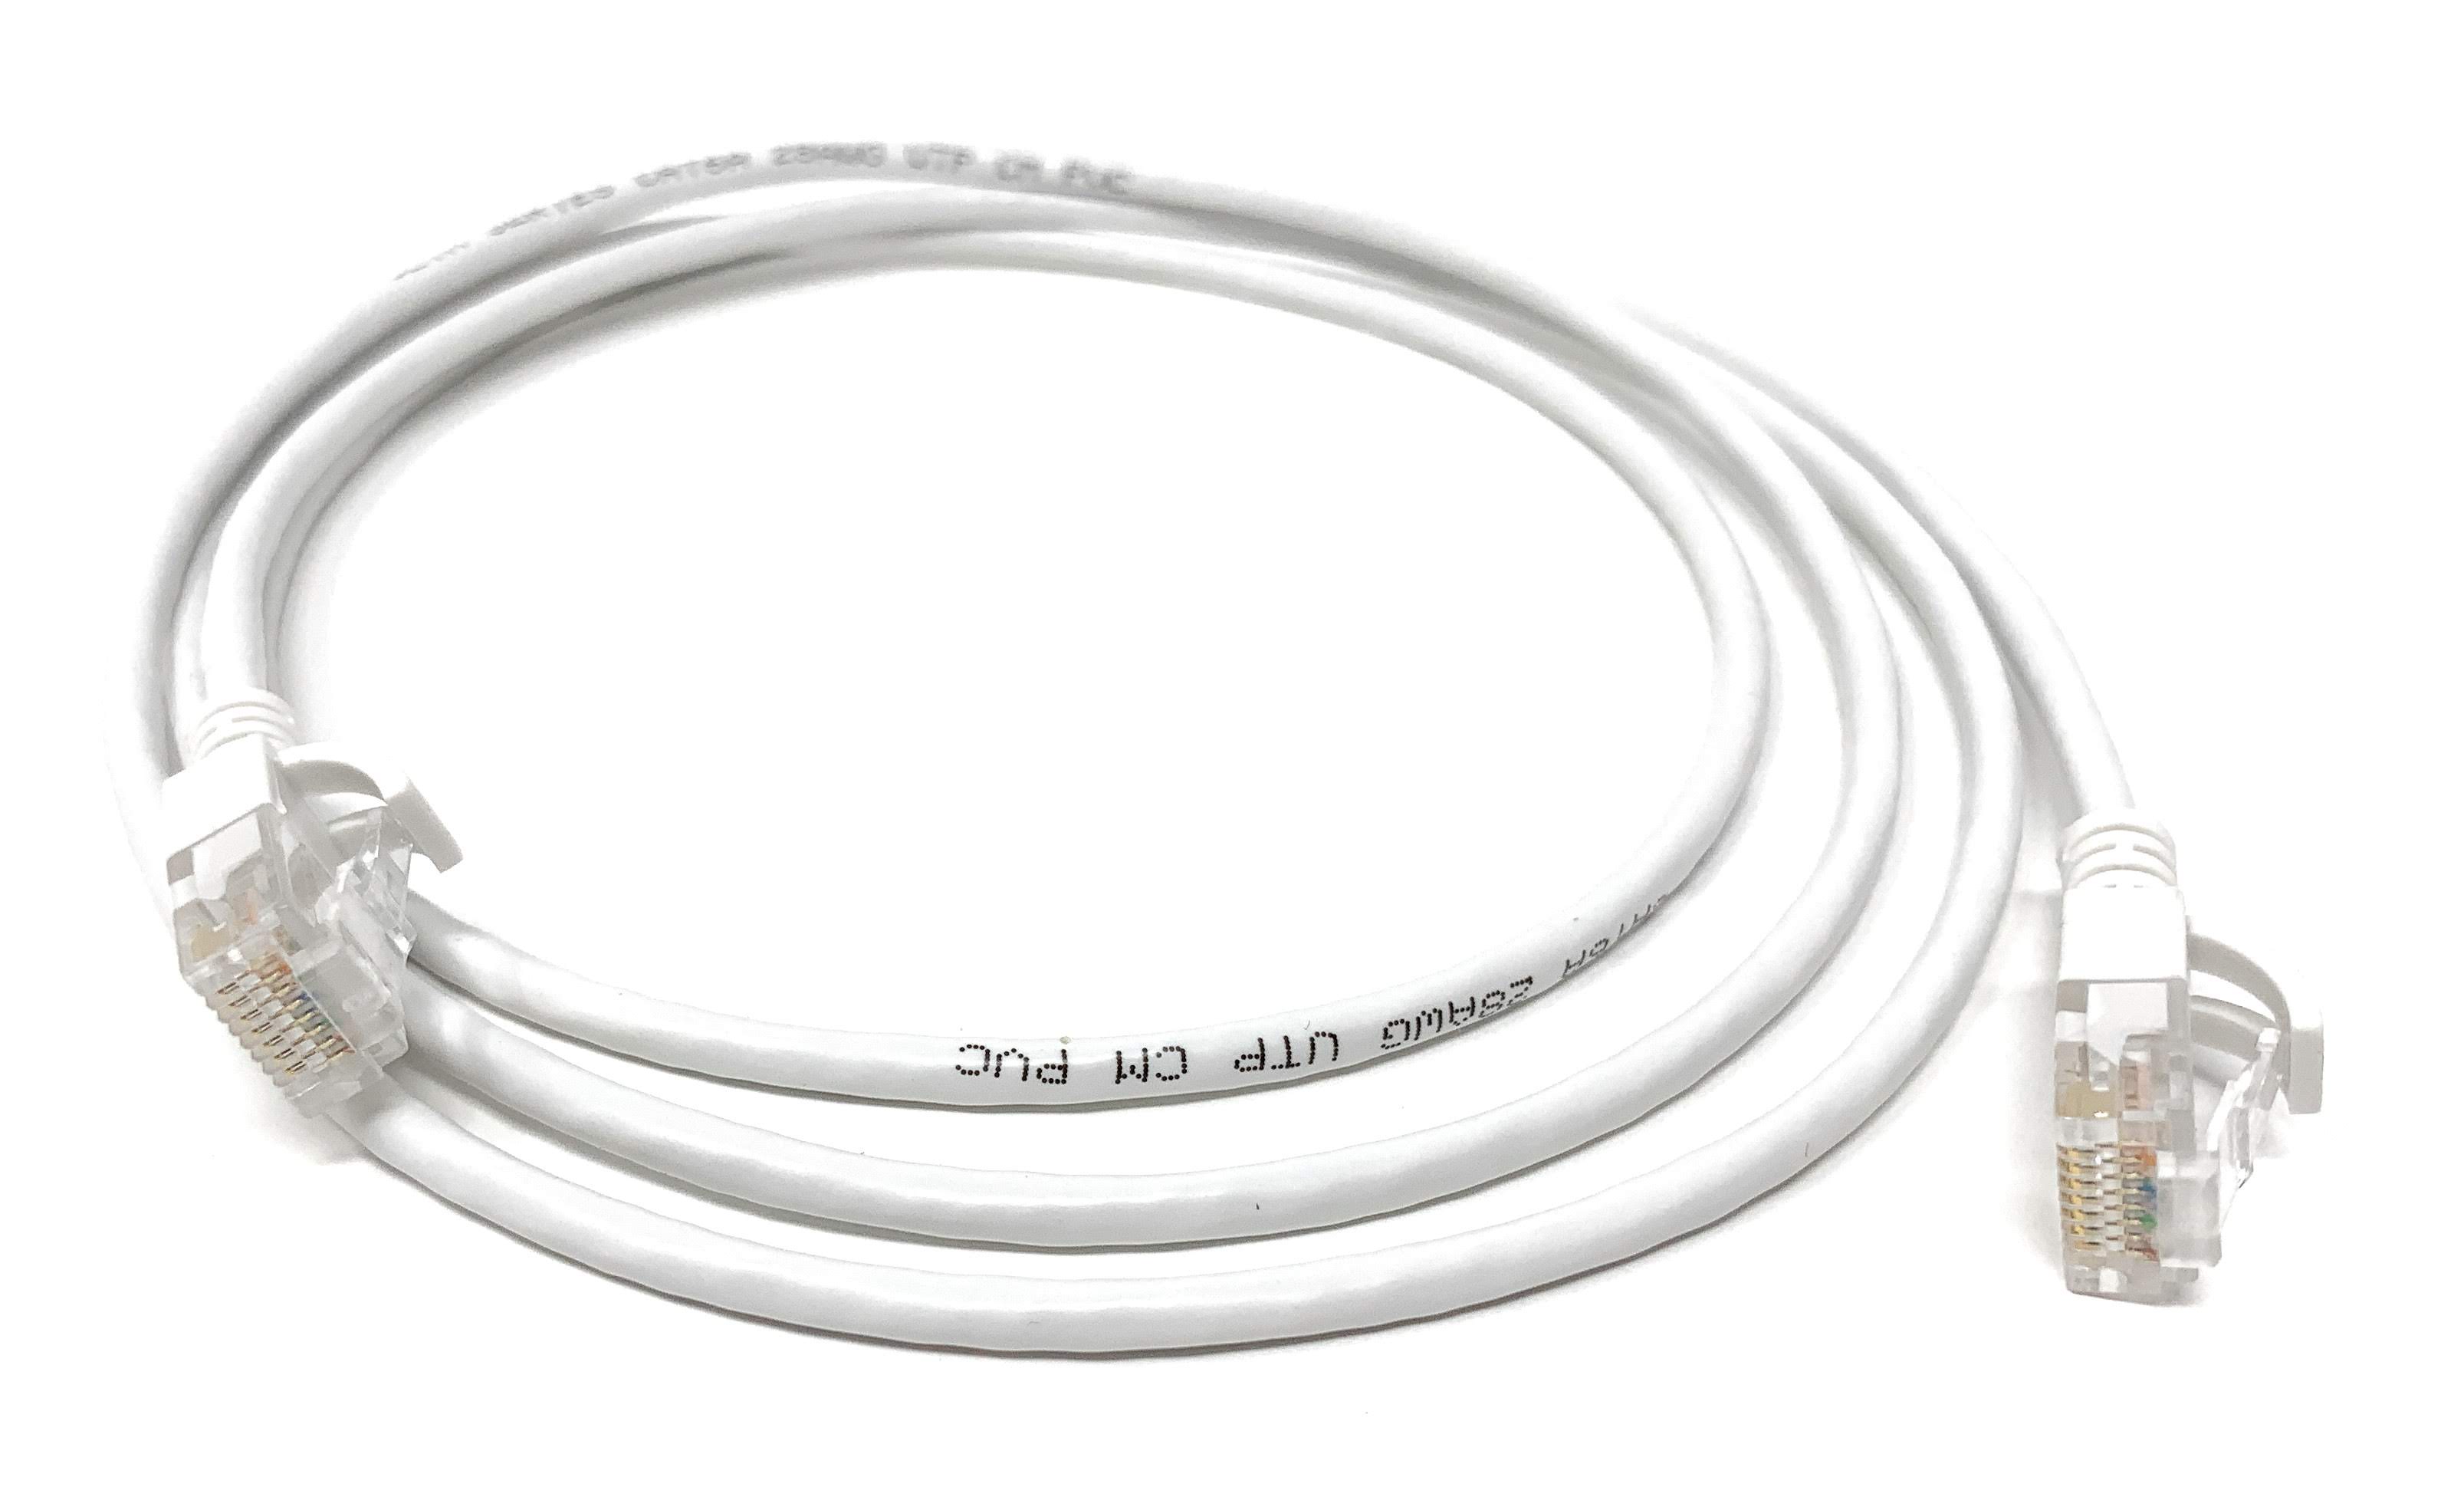 30Ft Cat6A UTP Slim Ethernet Network Booted Cable 28AWG White